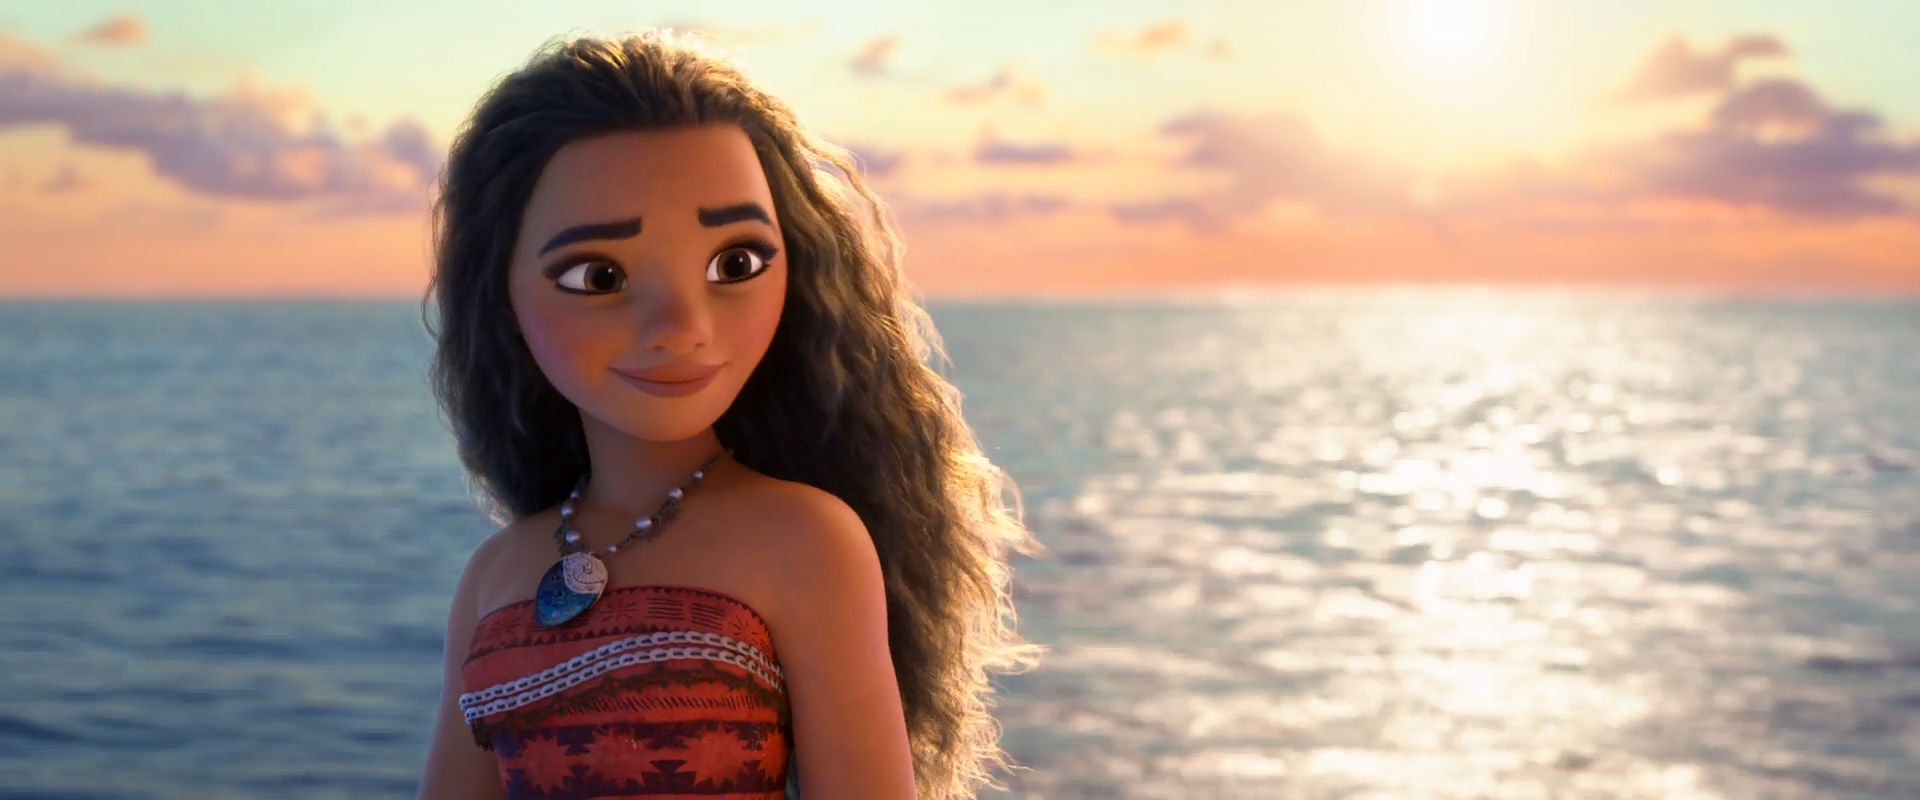 Image result for moana